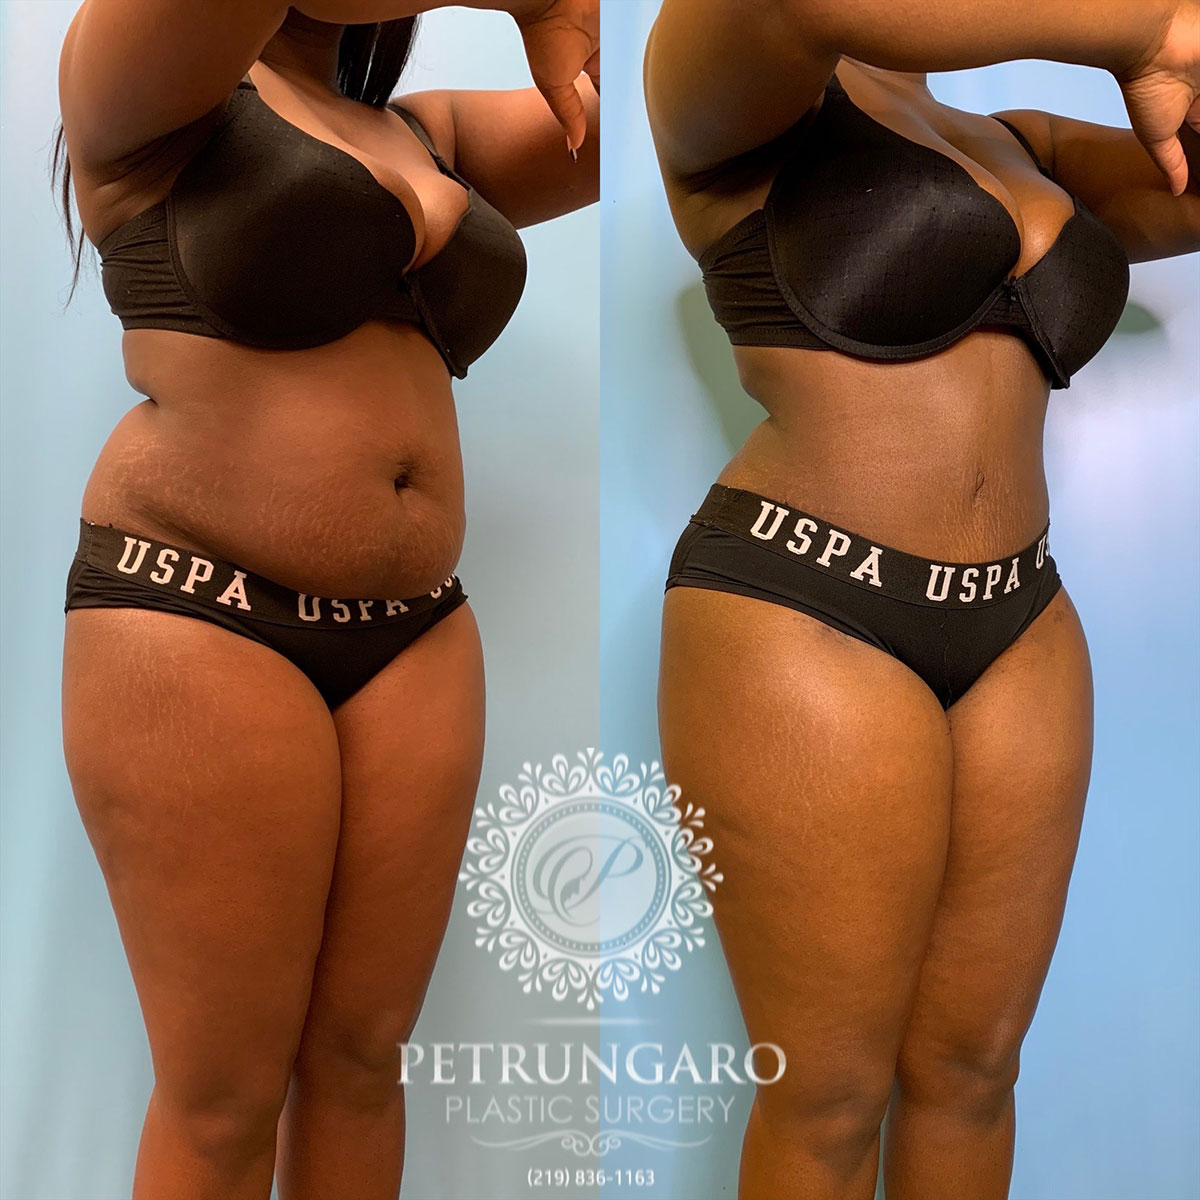 30 year old woman 3 months after tummy tuck with Lipo 360-4